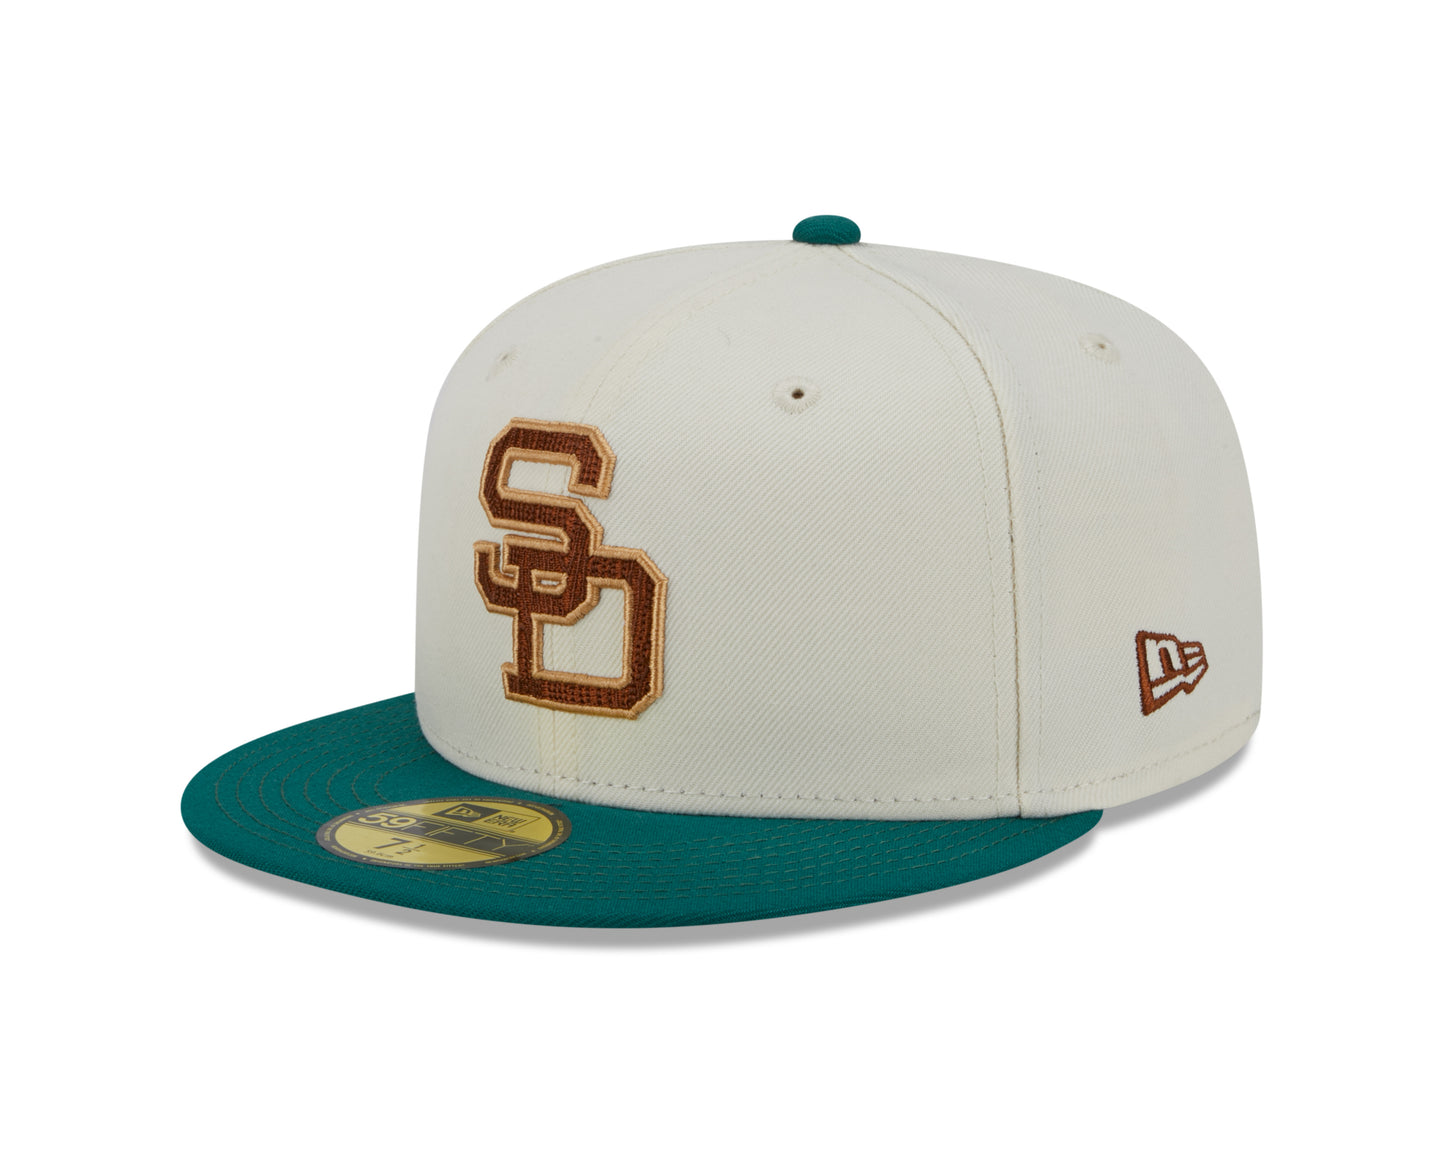 New Era - 59Fifty Fitted Cap - CAMP - San Diego Padres 49th Anniversary - White/Green - Headz Up 